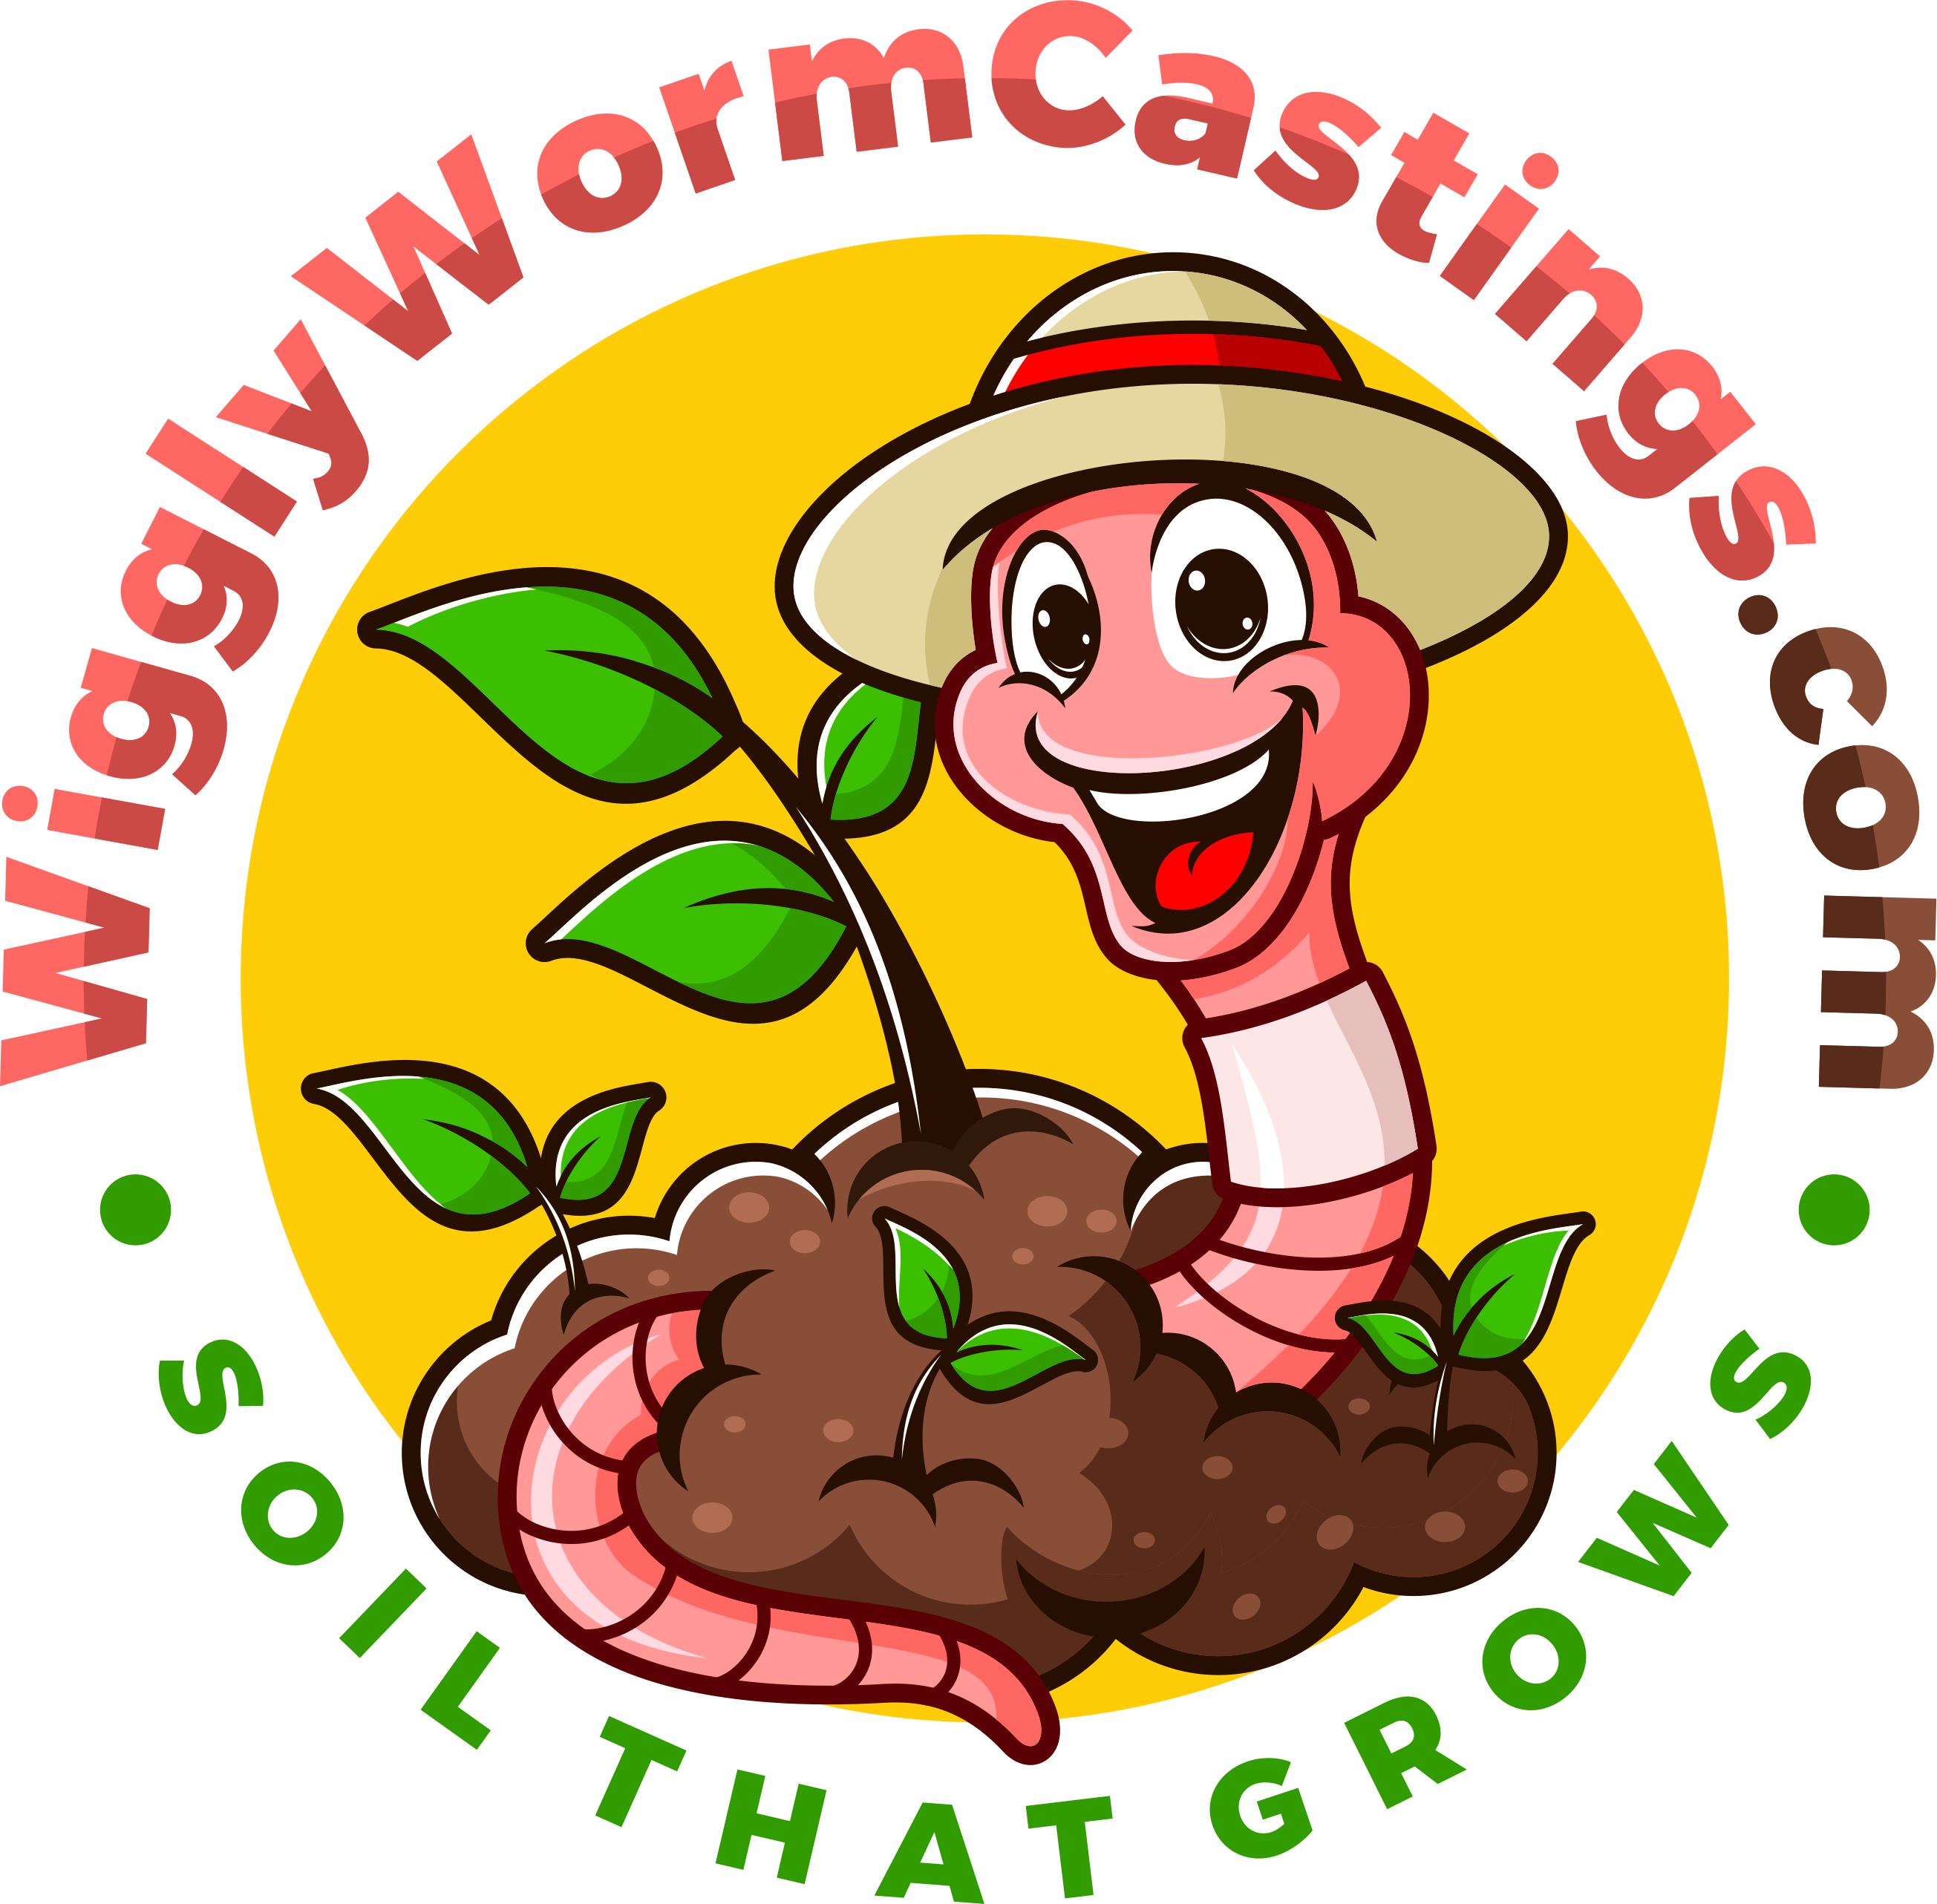 Products – Wiggly Worm Castings